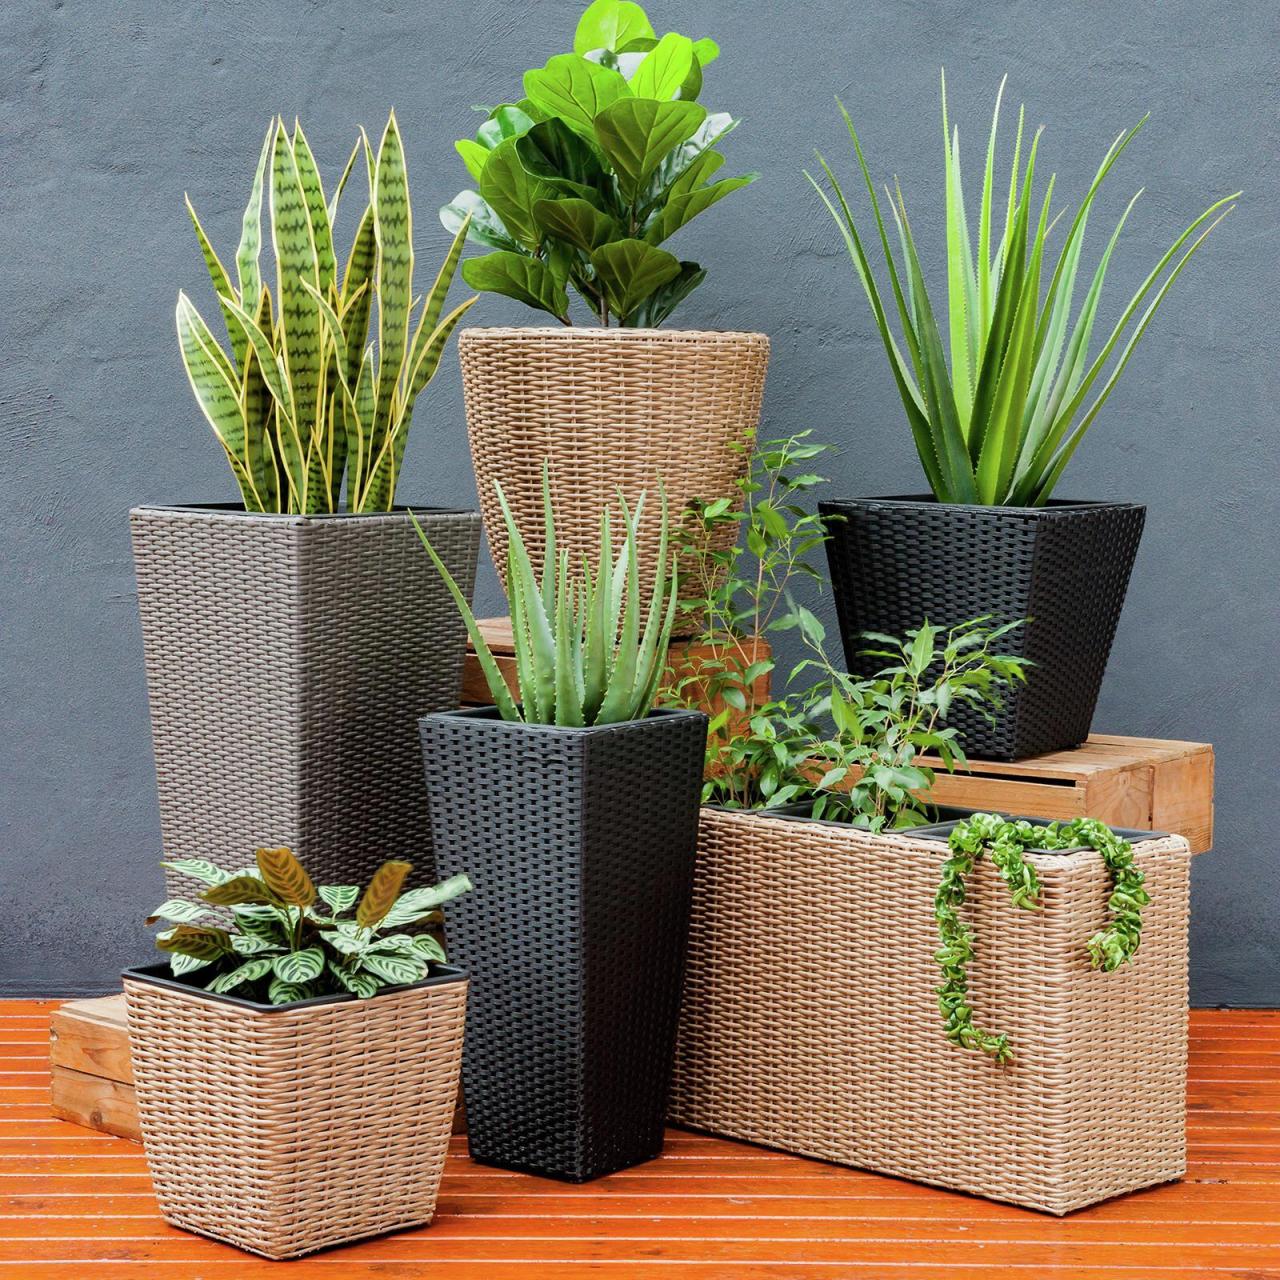 Hanging Plants Indoor | Bunnings Large Pots Outdoor: Enhance Your Garden with Style and Functionality